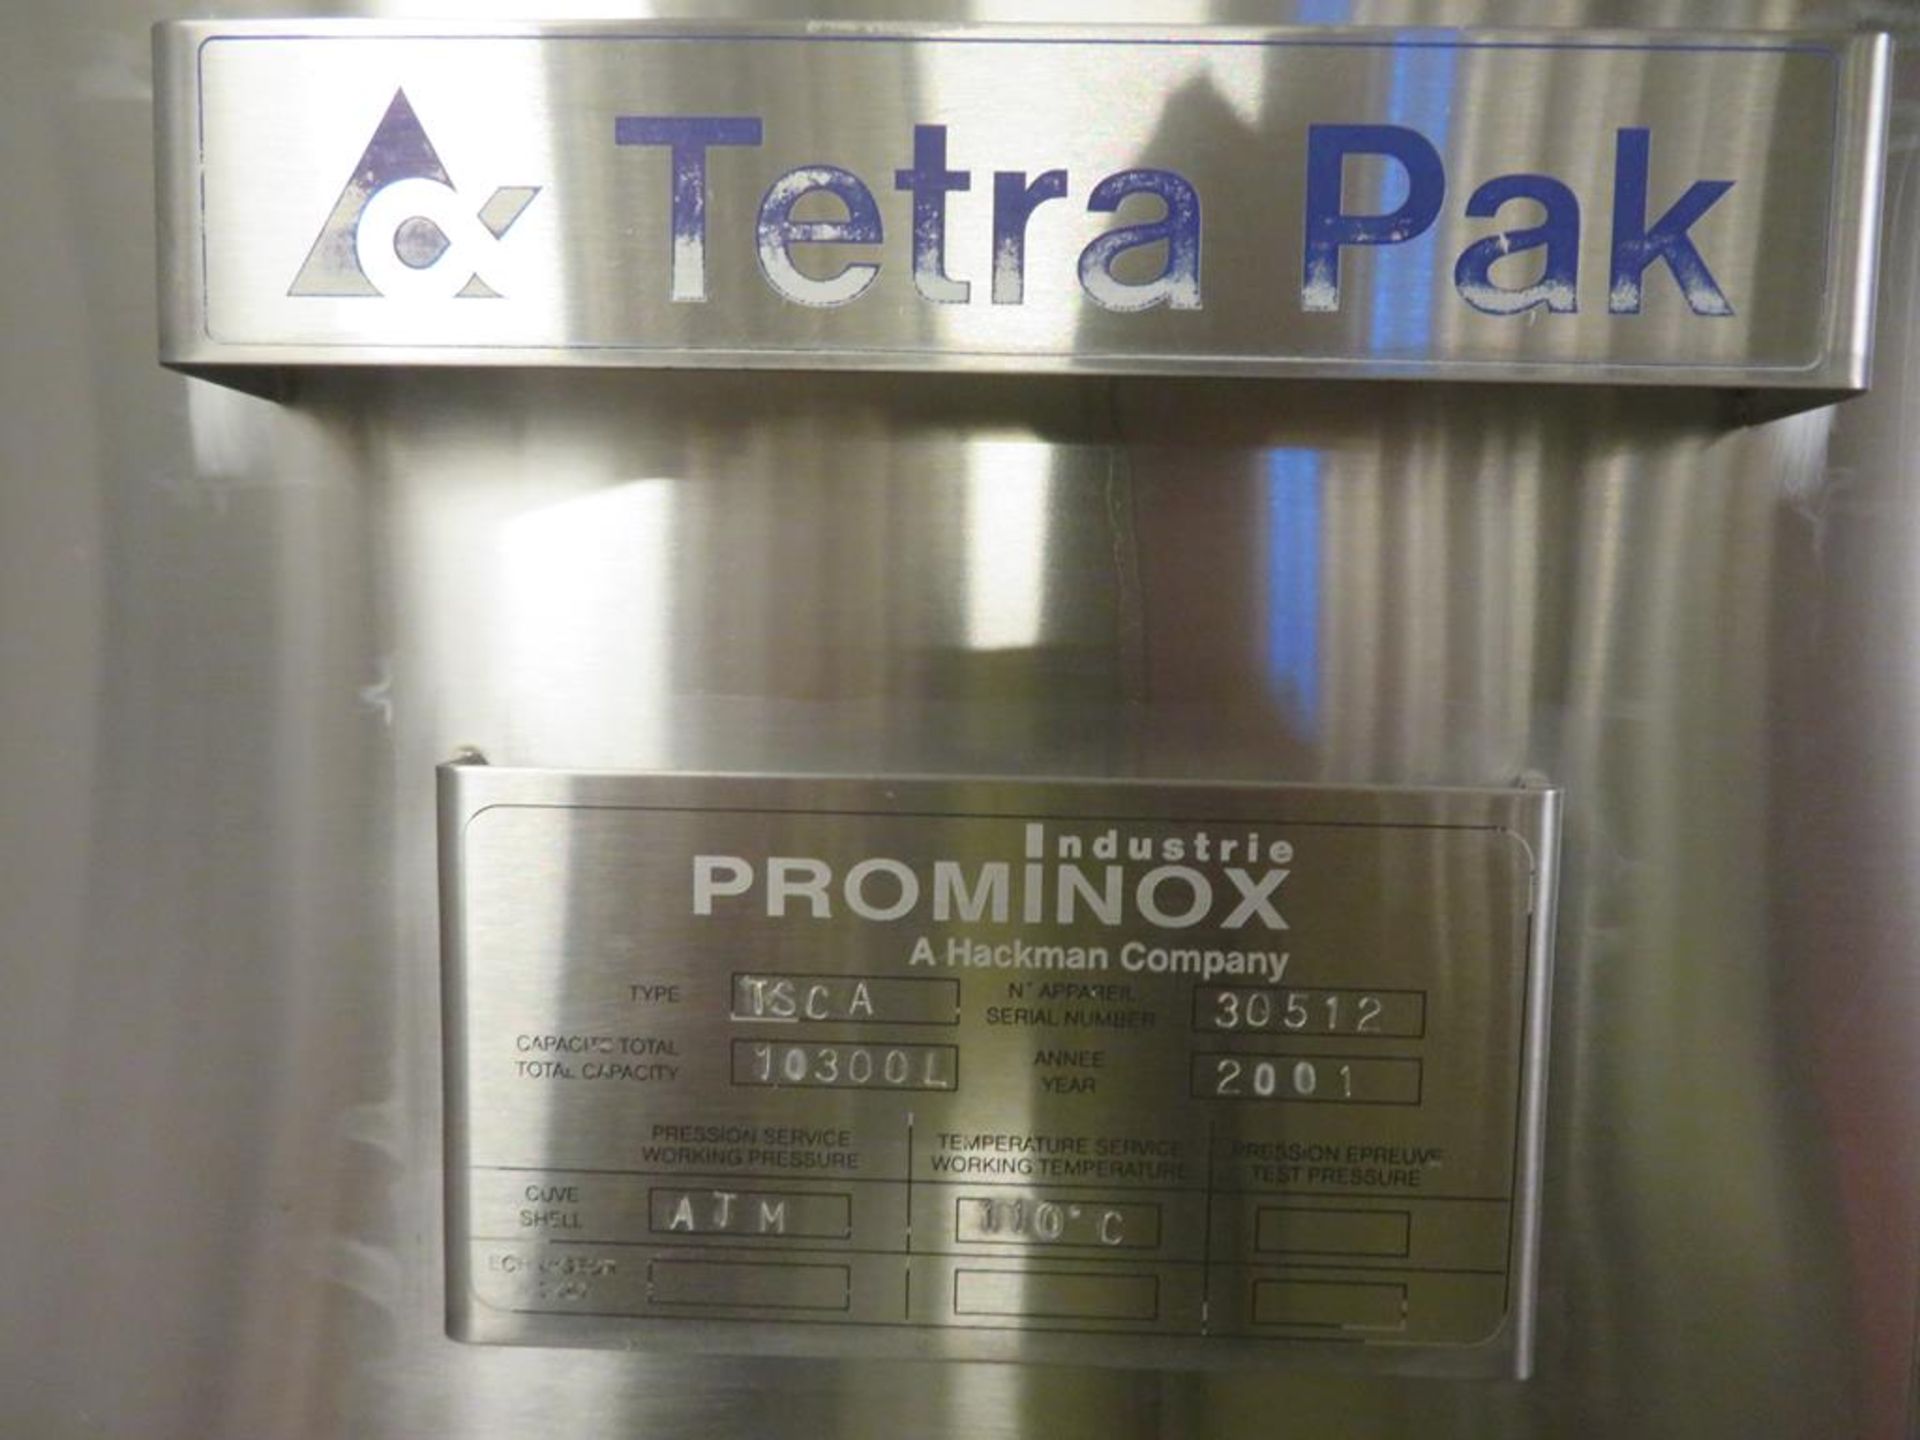 2001 Prominox Type TSCA 10,300L Insulated Stainless Steel Tank (DT1) - Image 2 of 4